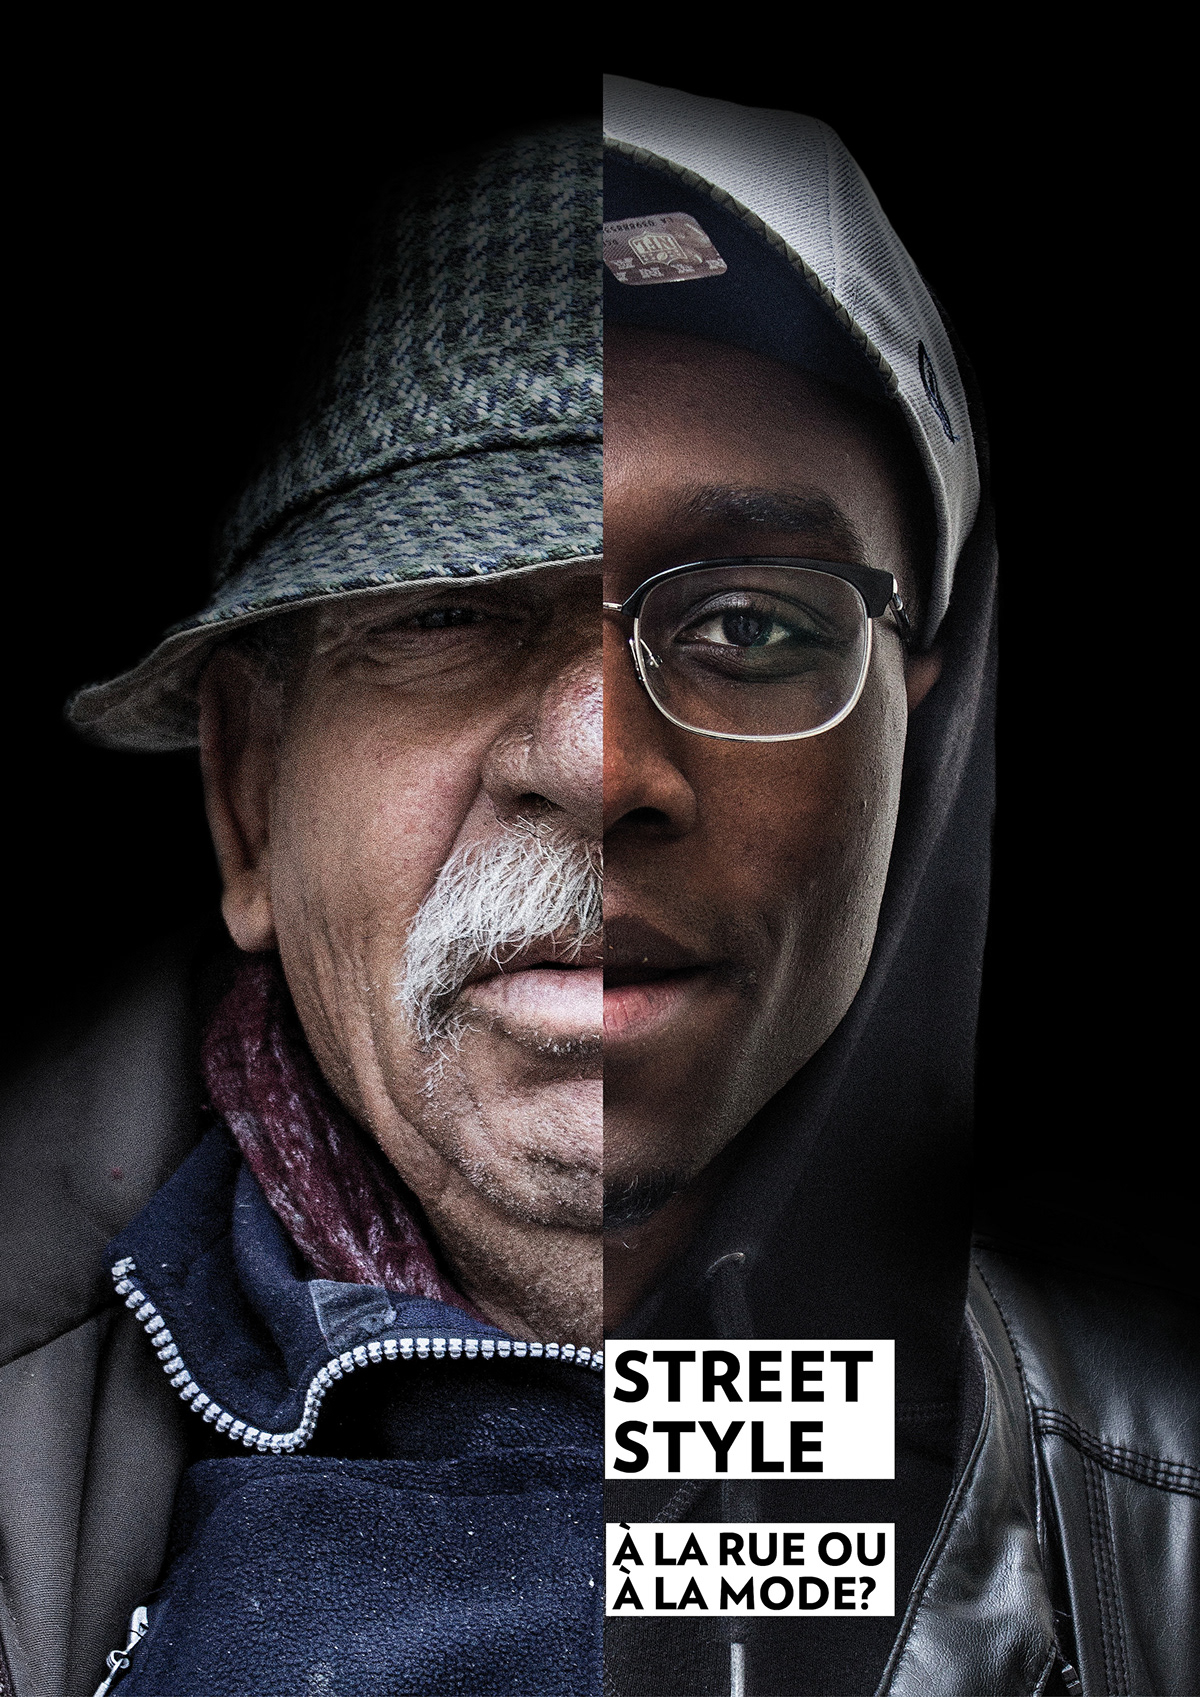 Street street photography hipsters homeless portraits colour portraits homeless portraits hipster portraits